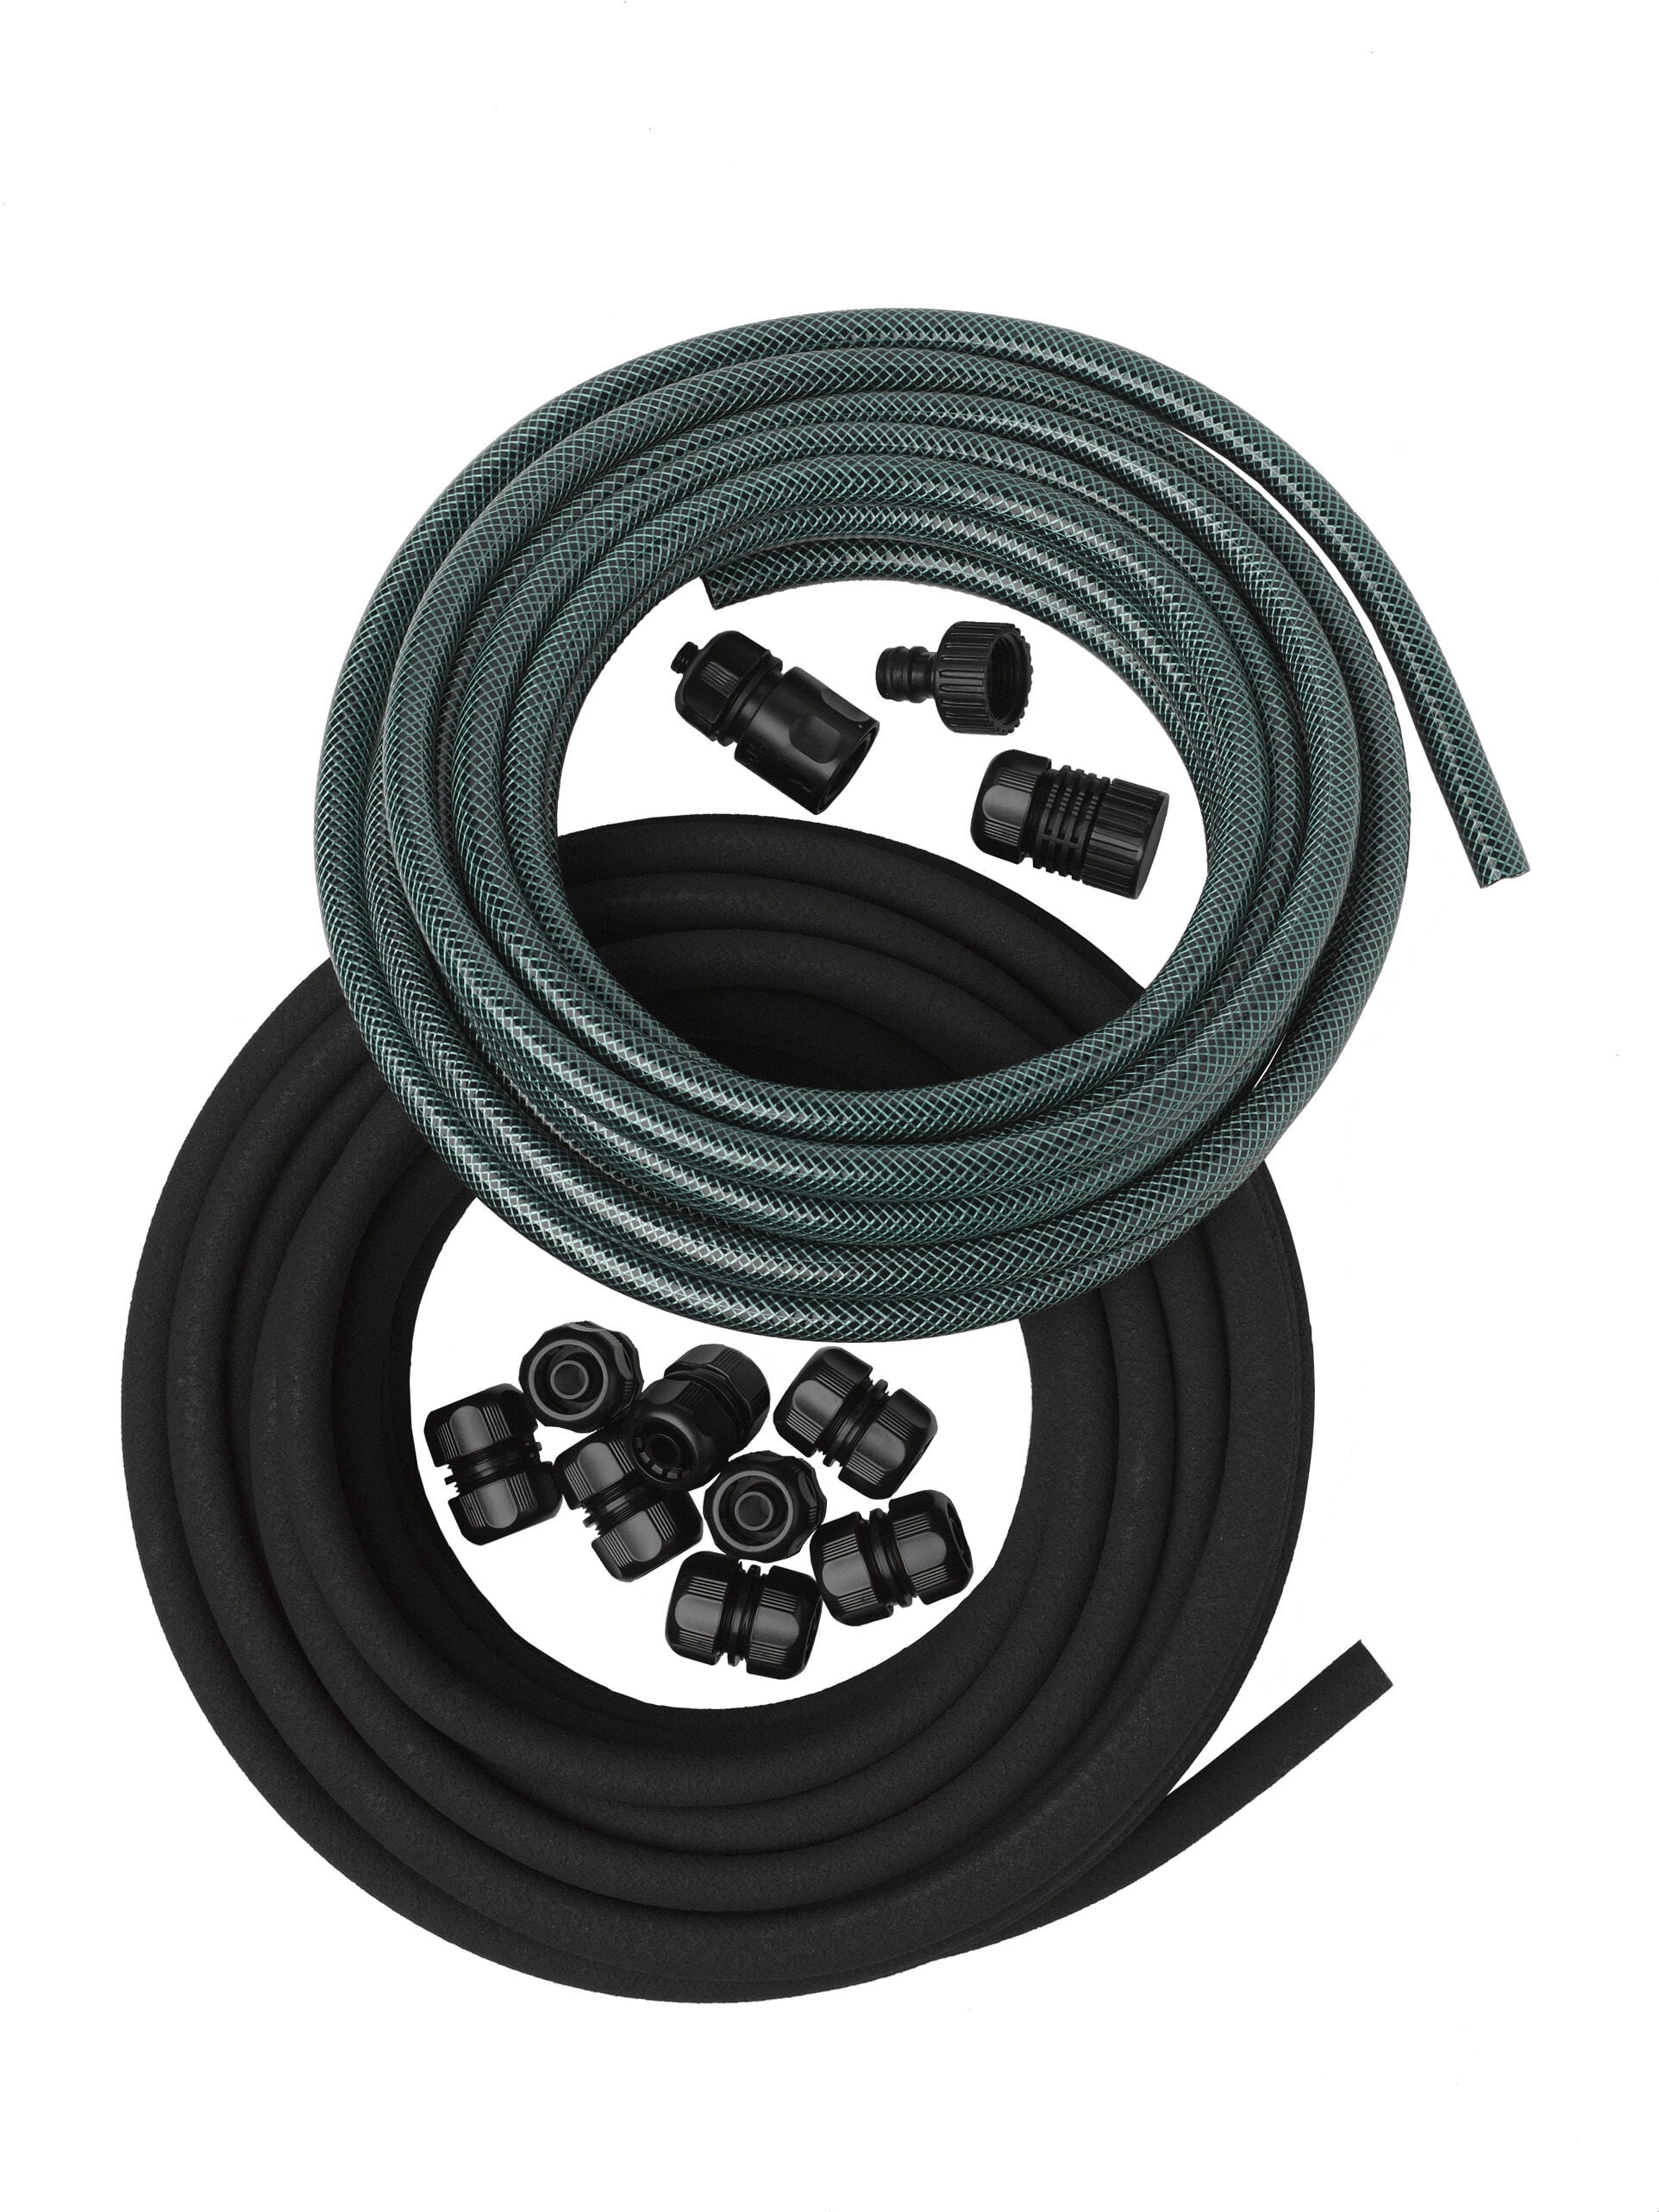 All sizes up to 200m Fast Dispatch Details about   Porous Pipe/ Soaker Hose/ Leaky pipe 